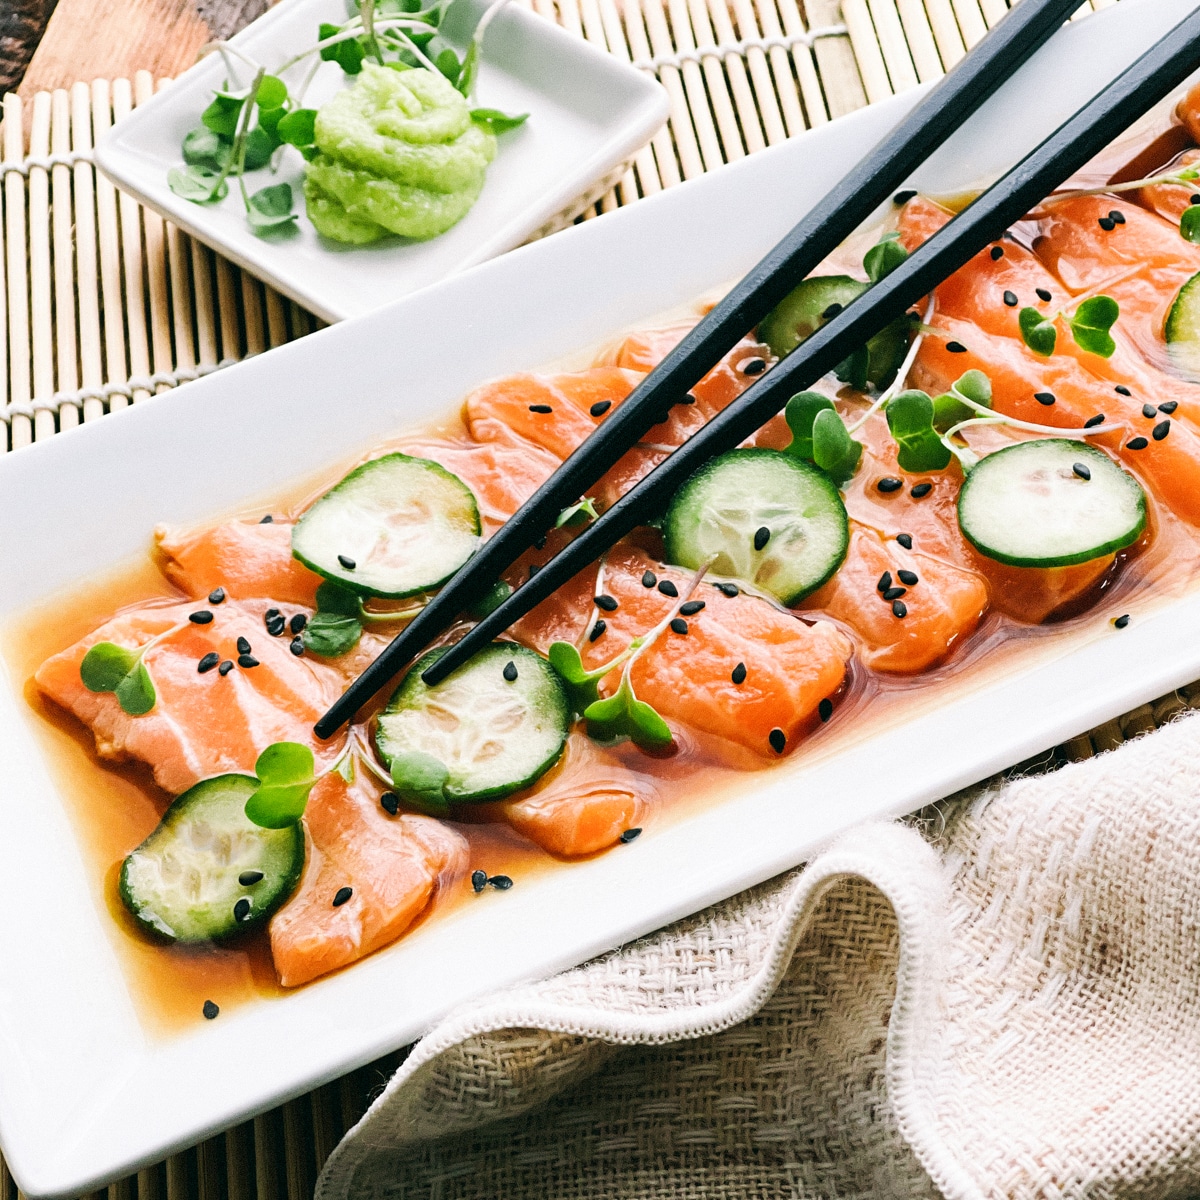 Slices of fresh sashimi salmon on a white platter topped with sliced cucumbers on top and sprinkles of black sesame seeds, with black chopsticks, a Japanese tea kettle, and a small white bowl of green wasabi on the side.